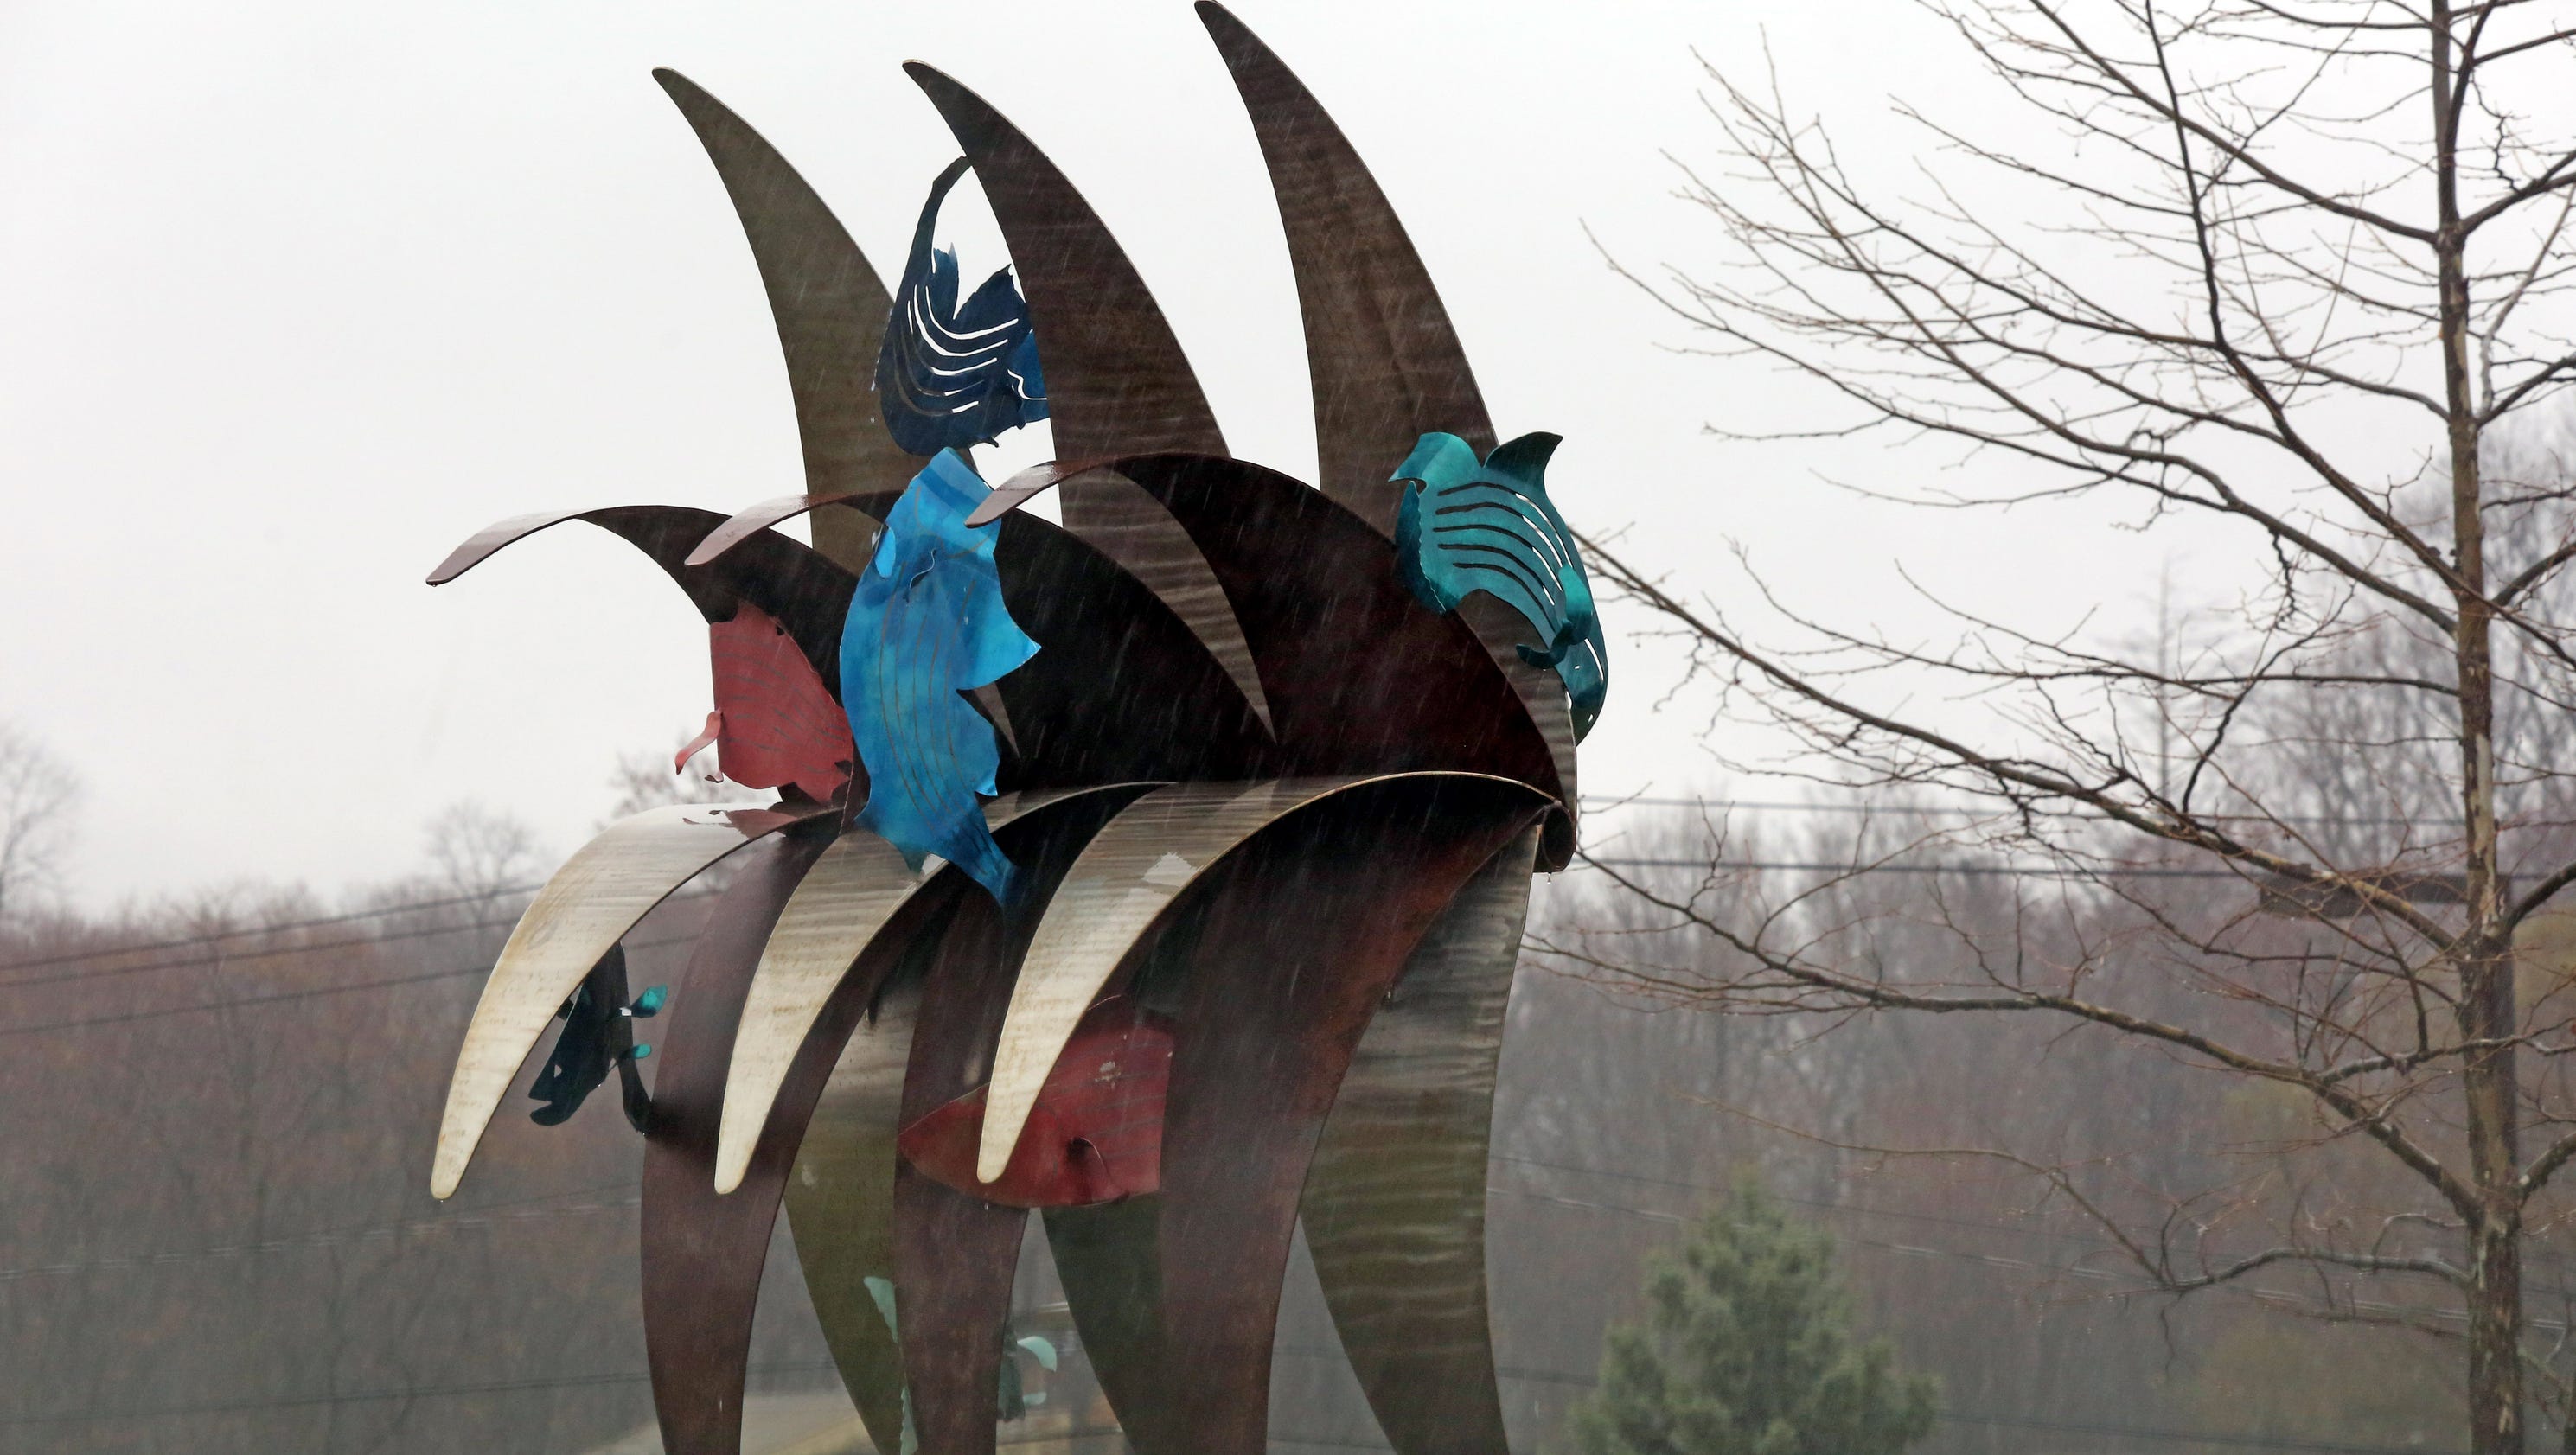 Rockland Community College adds sculptures; video - The Journal News | LoHud.com